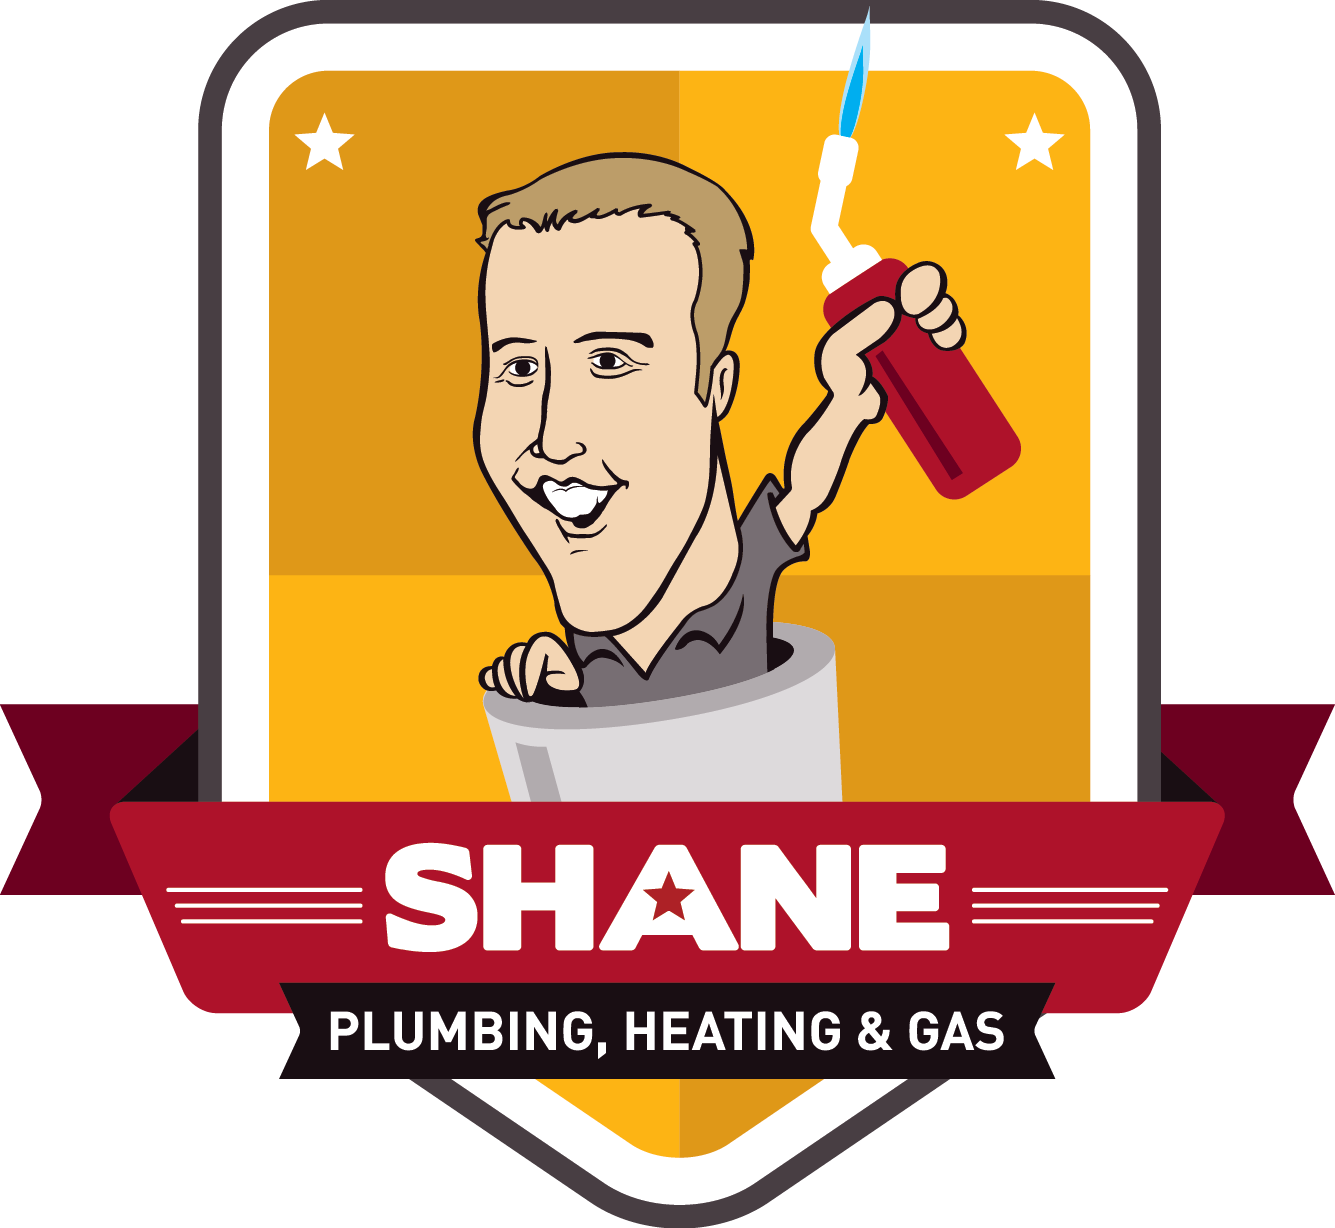 Plumber clipart plumbing heating. Manchester and gas safe